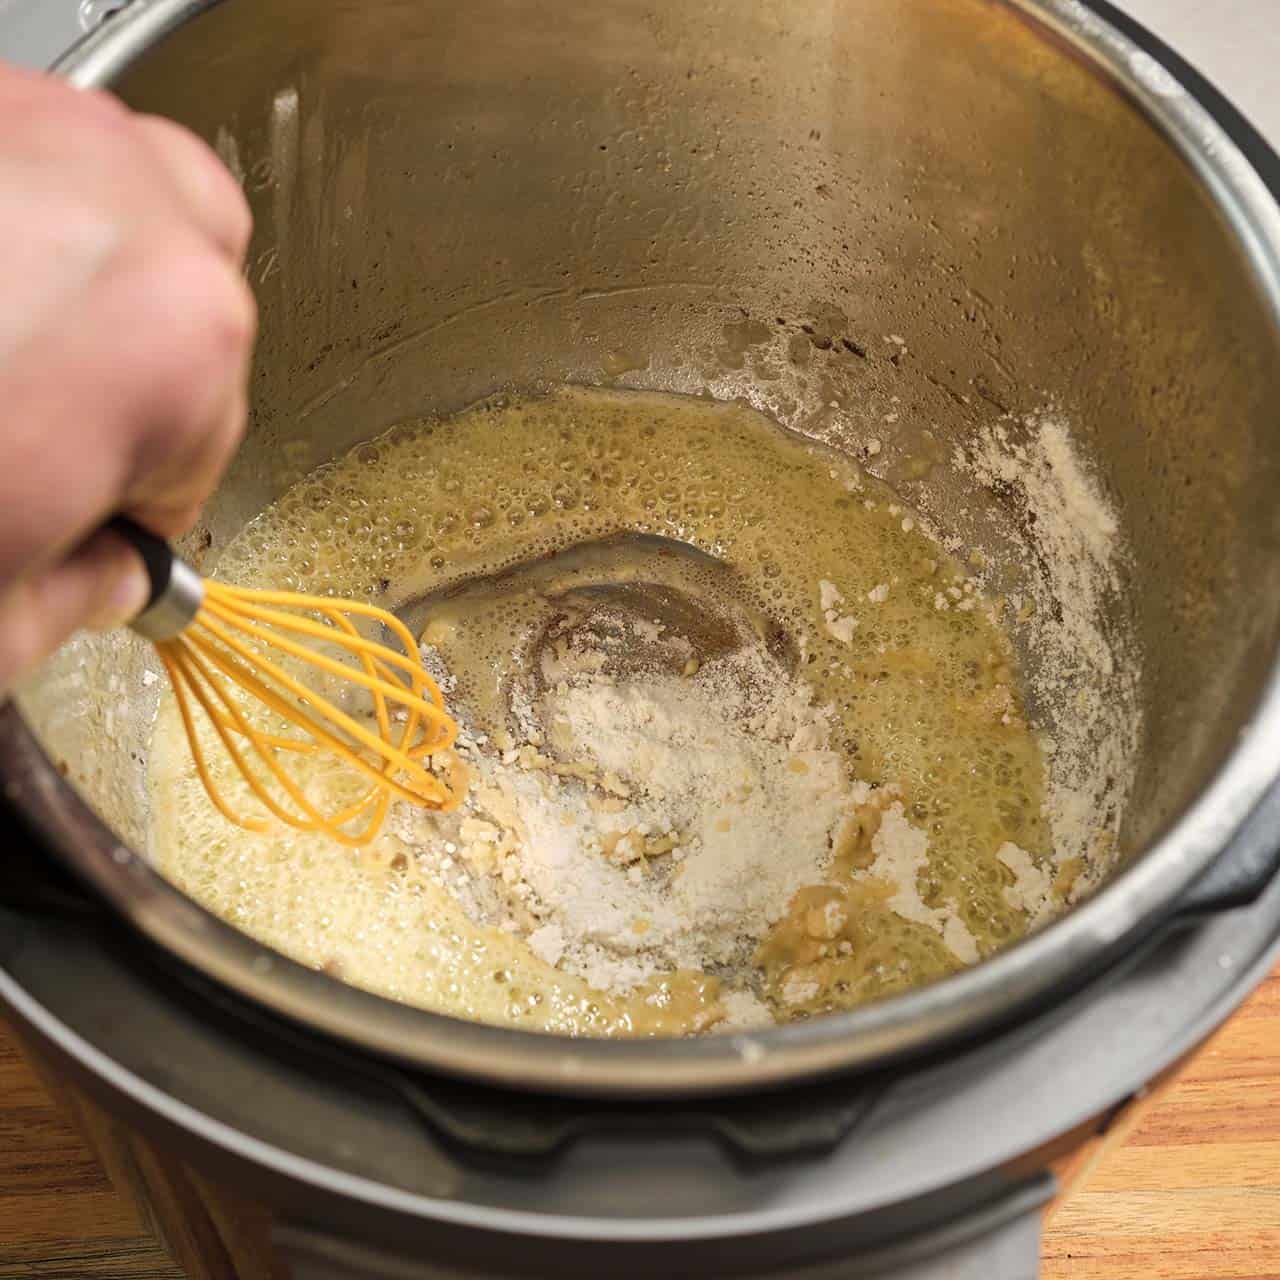 Whisking flour into melted butter in an Instant Pot